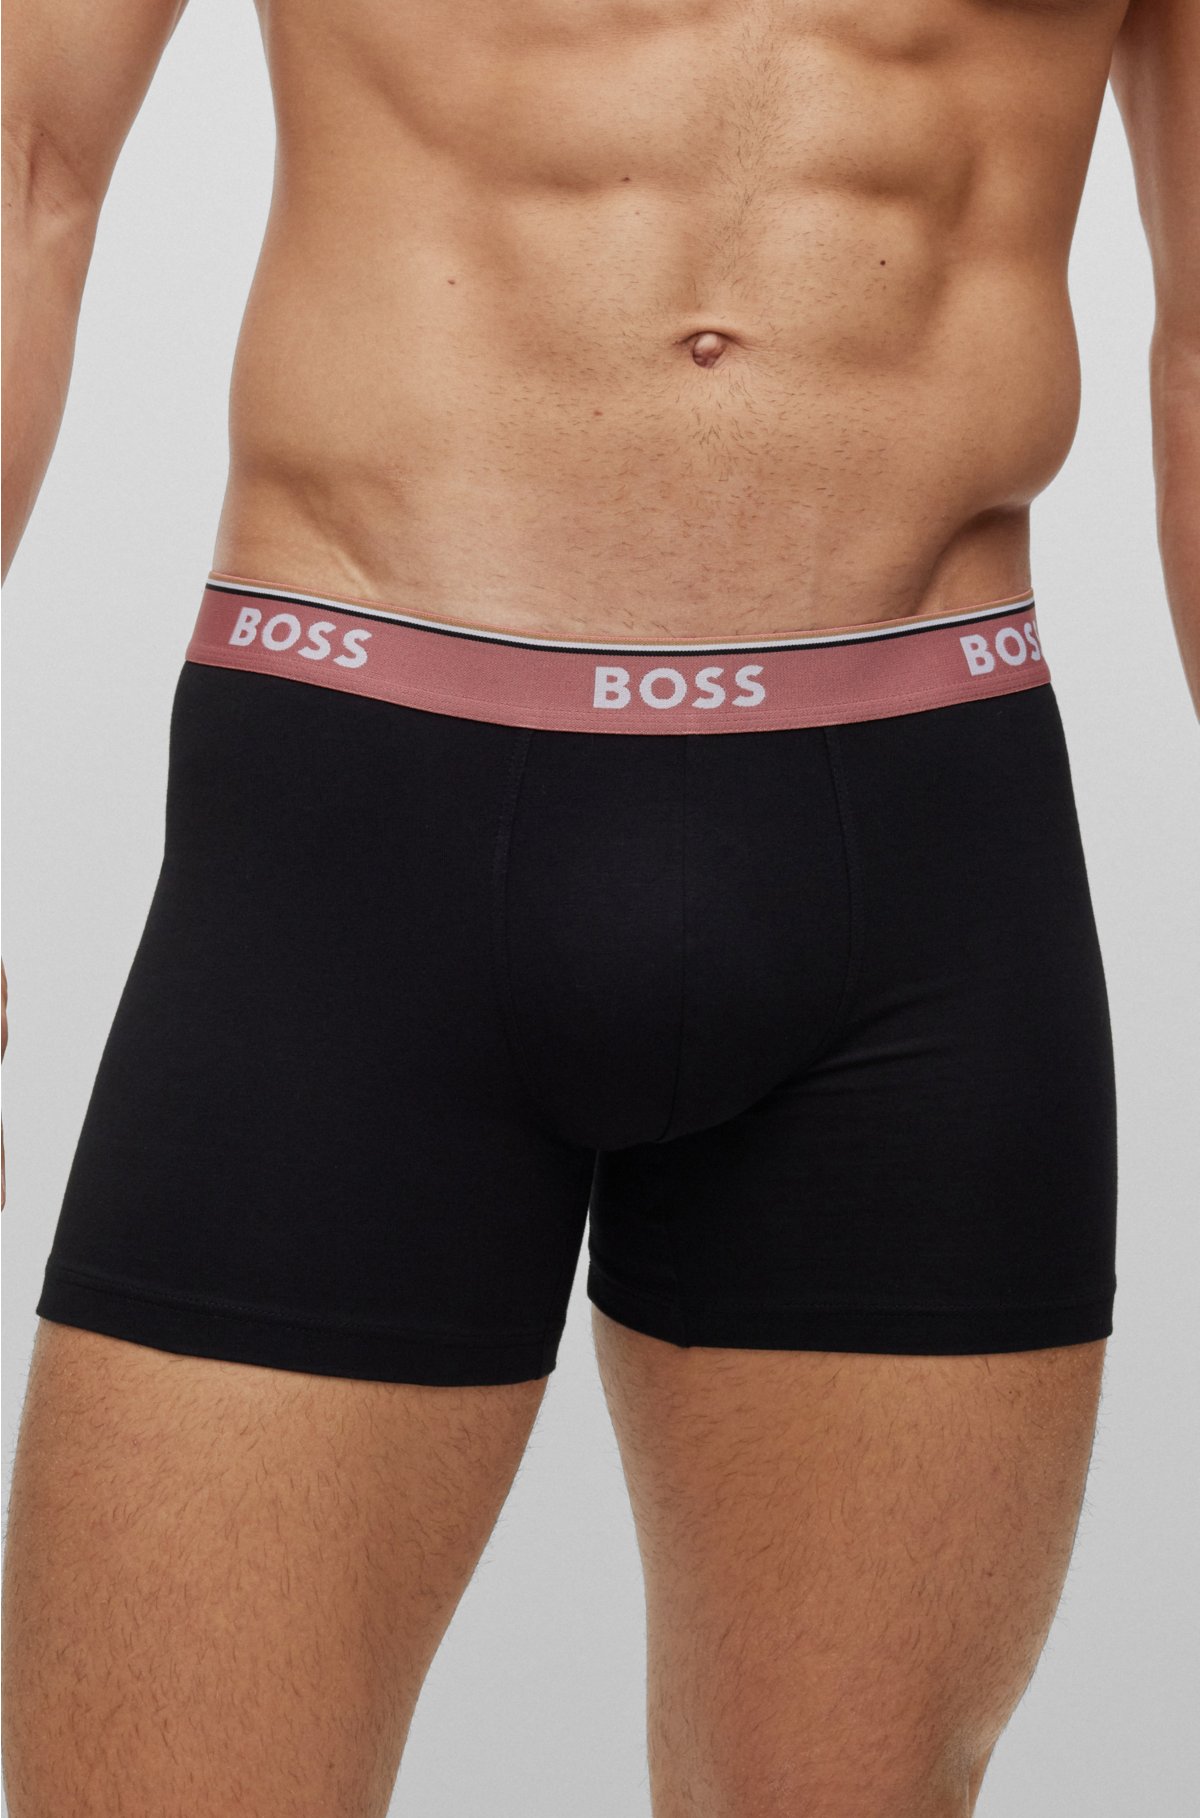 - Three-pack waistbands briefs logo of boxer BOSS with